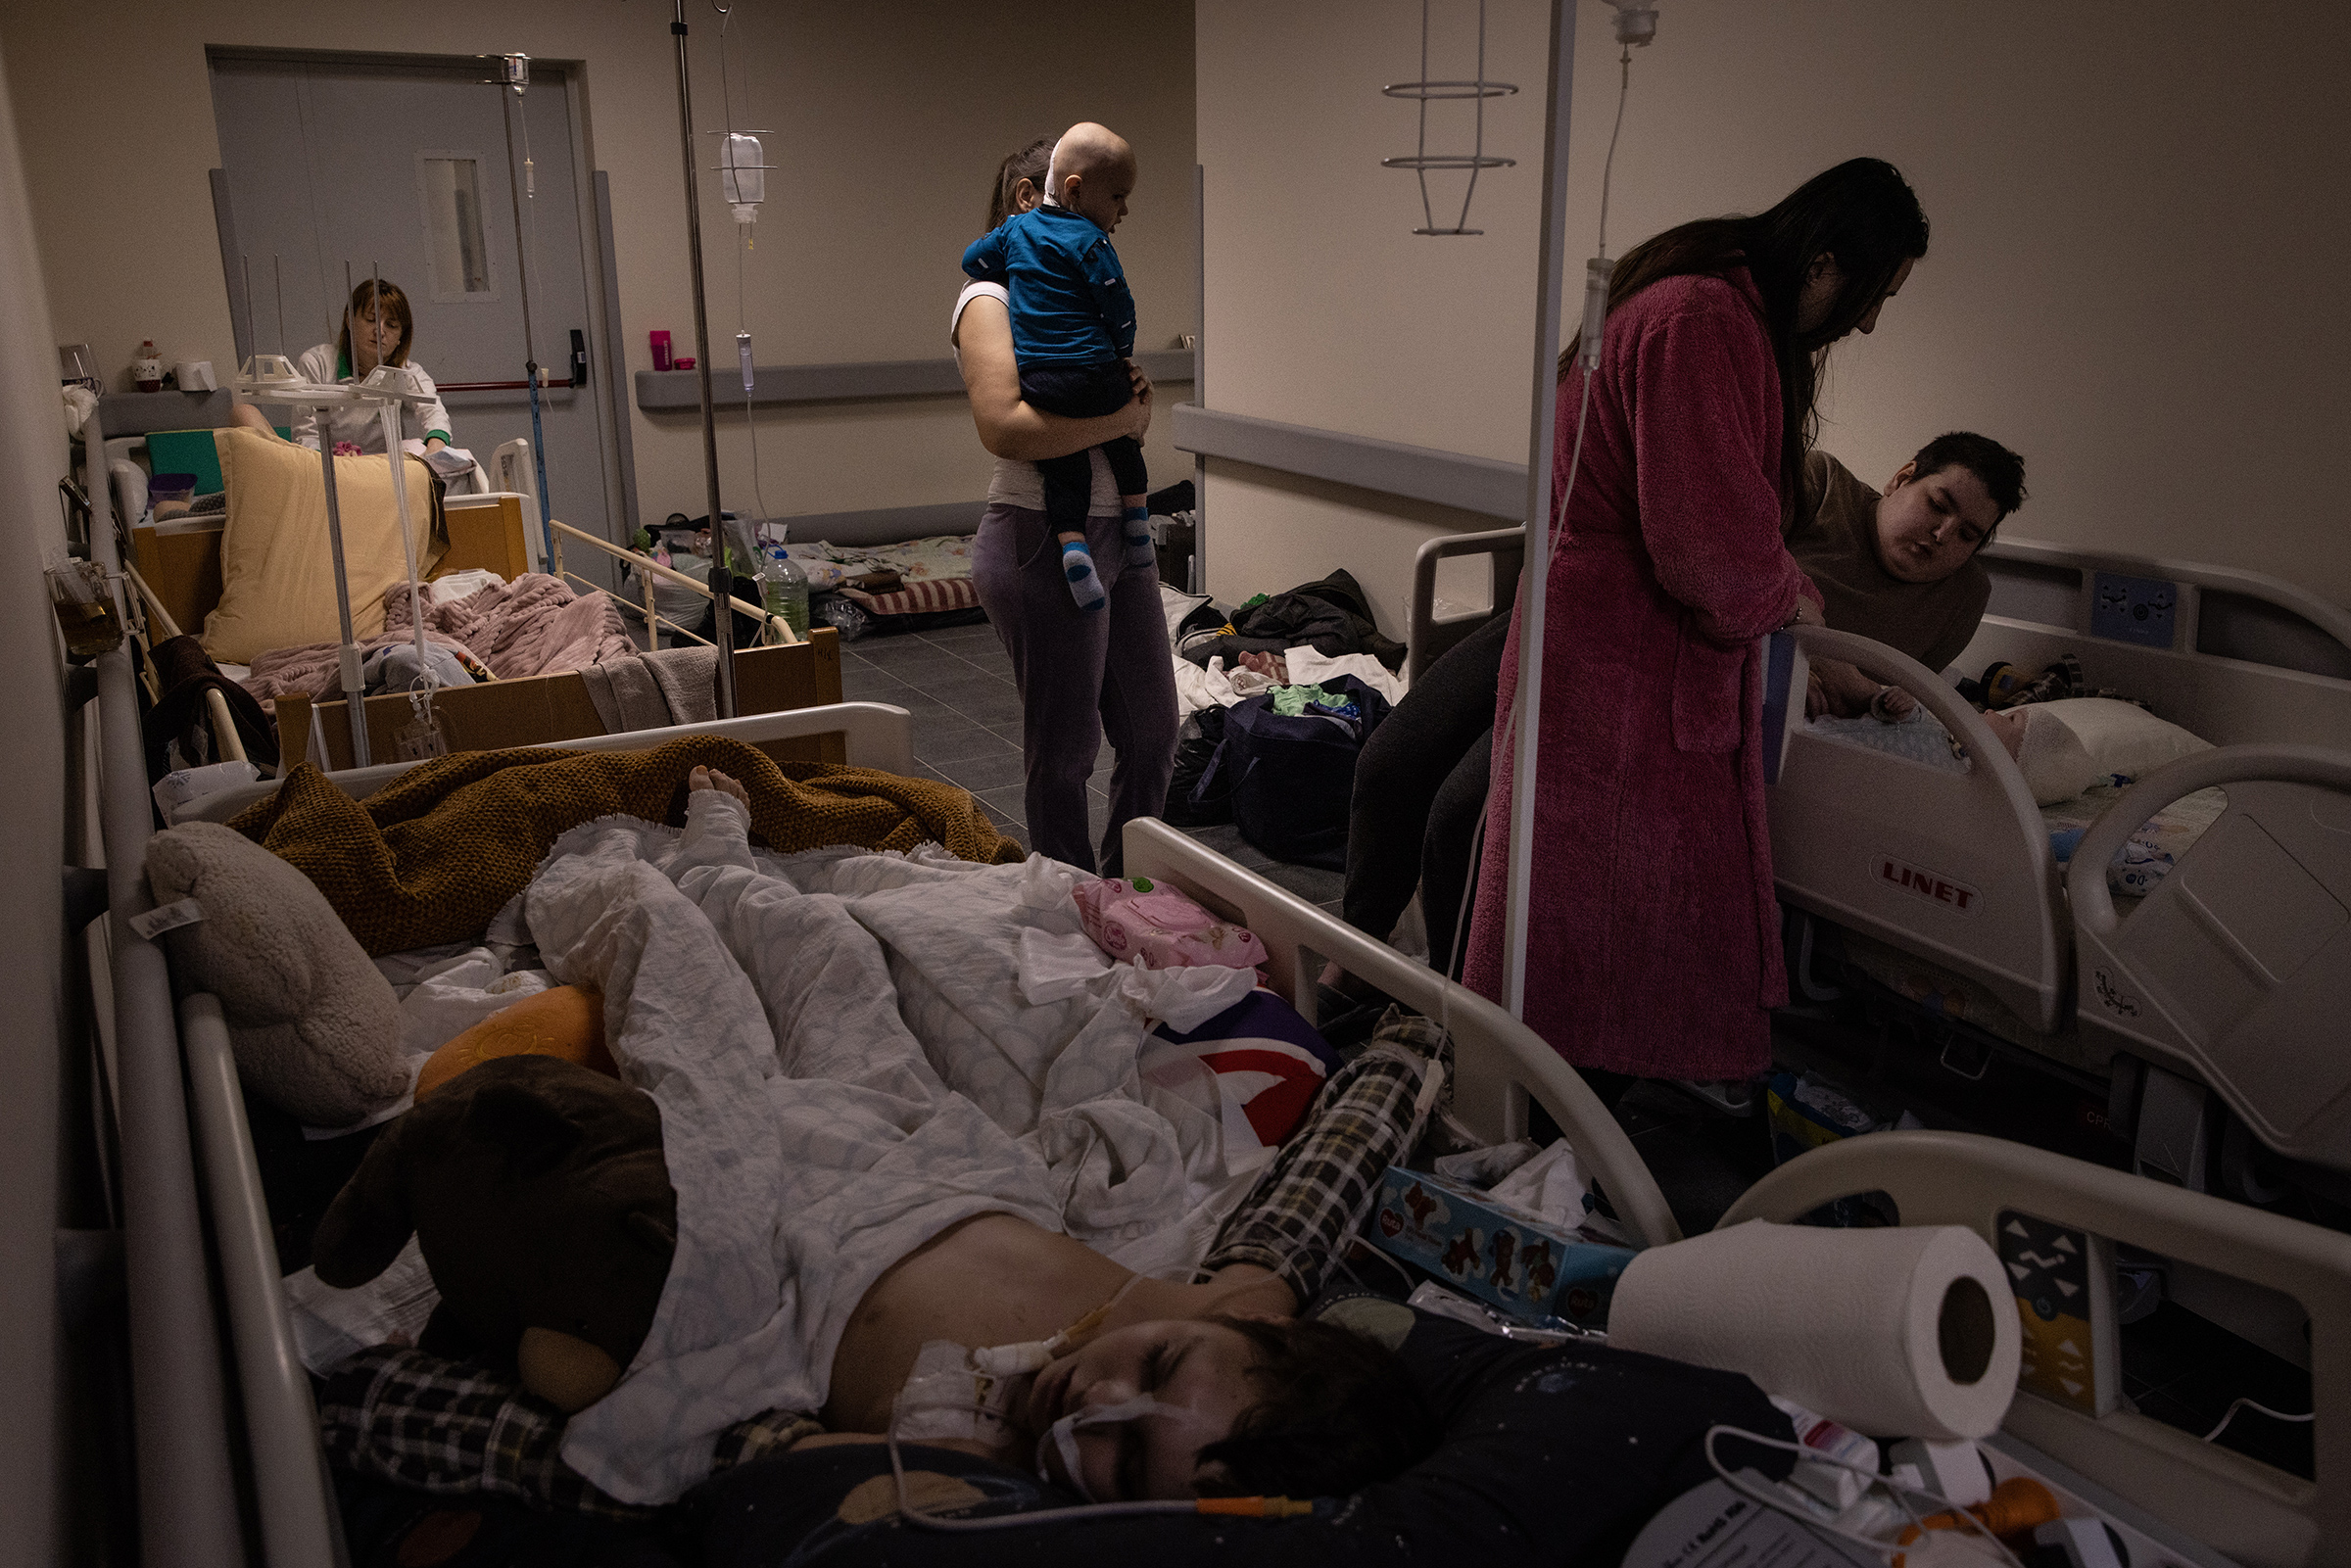 Mothers tend to their children who are undergoing cancer treatment in the bomb shelter of the Oncology ward at Okhmatdyt Children's Hospital on Feb. 28 in Kyiv, Ukraine (Chris McGrath—Getty Images)